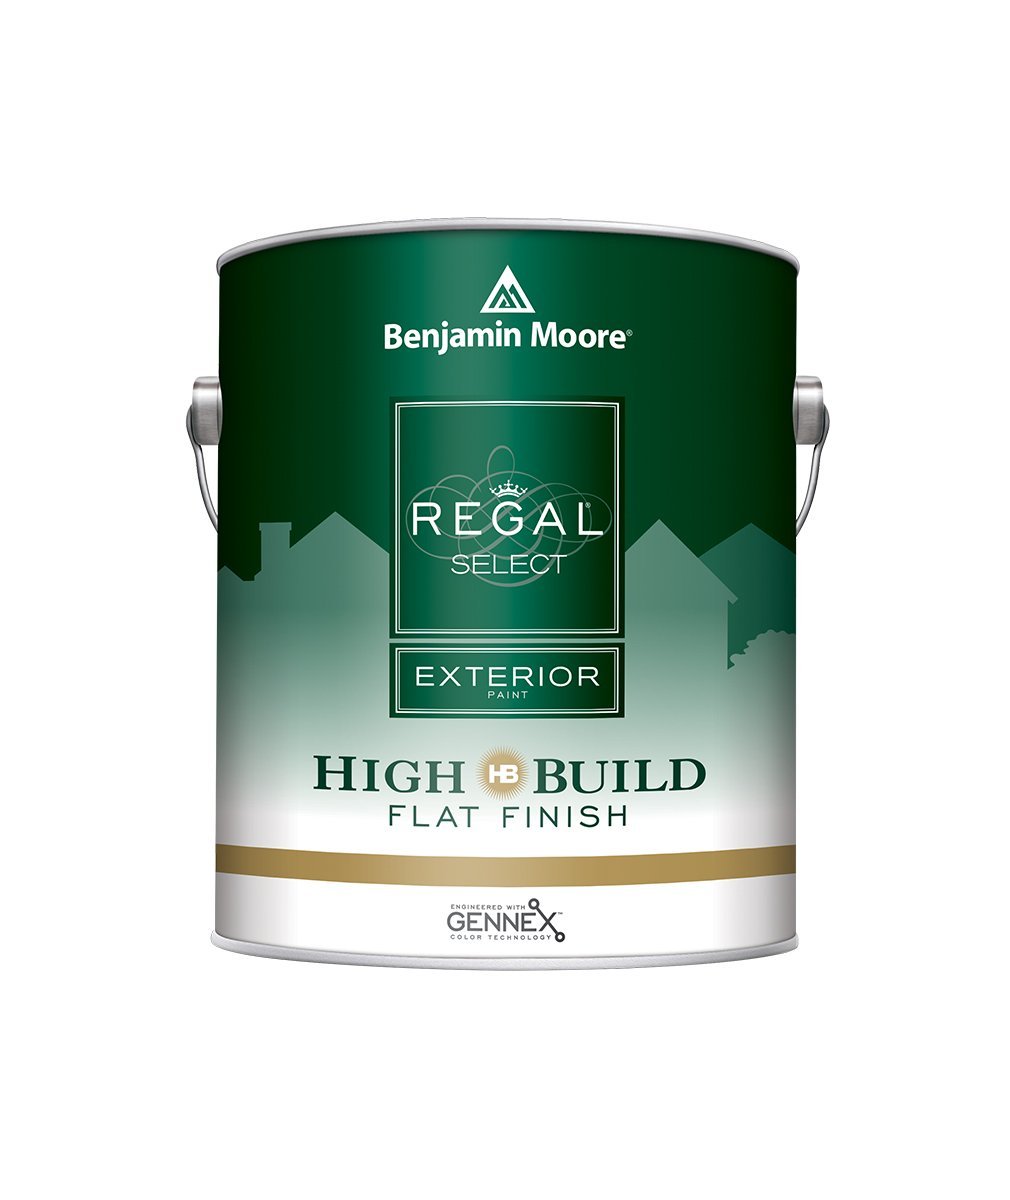 Benjamin Moore Regal Select High Build Flat Exterior Paint Gallon, , available at Johnson Paint & Maine Paint in MA, NH & ME. 